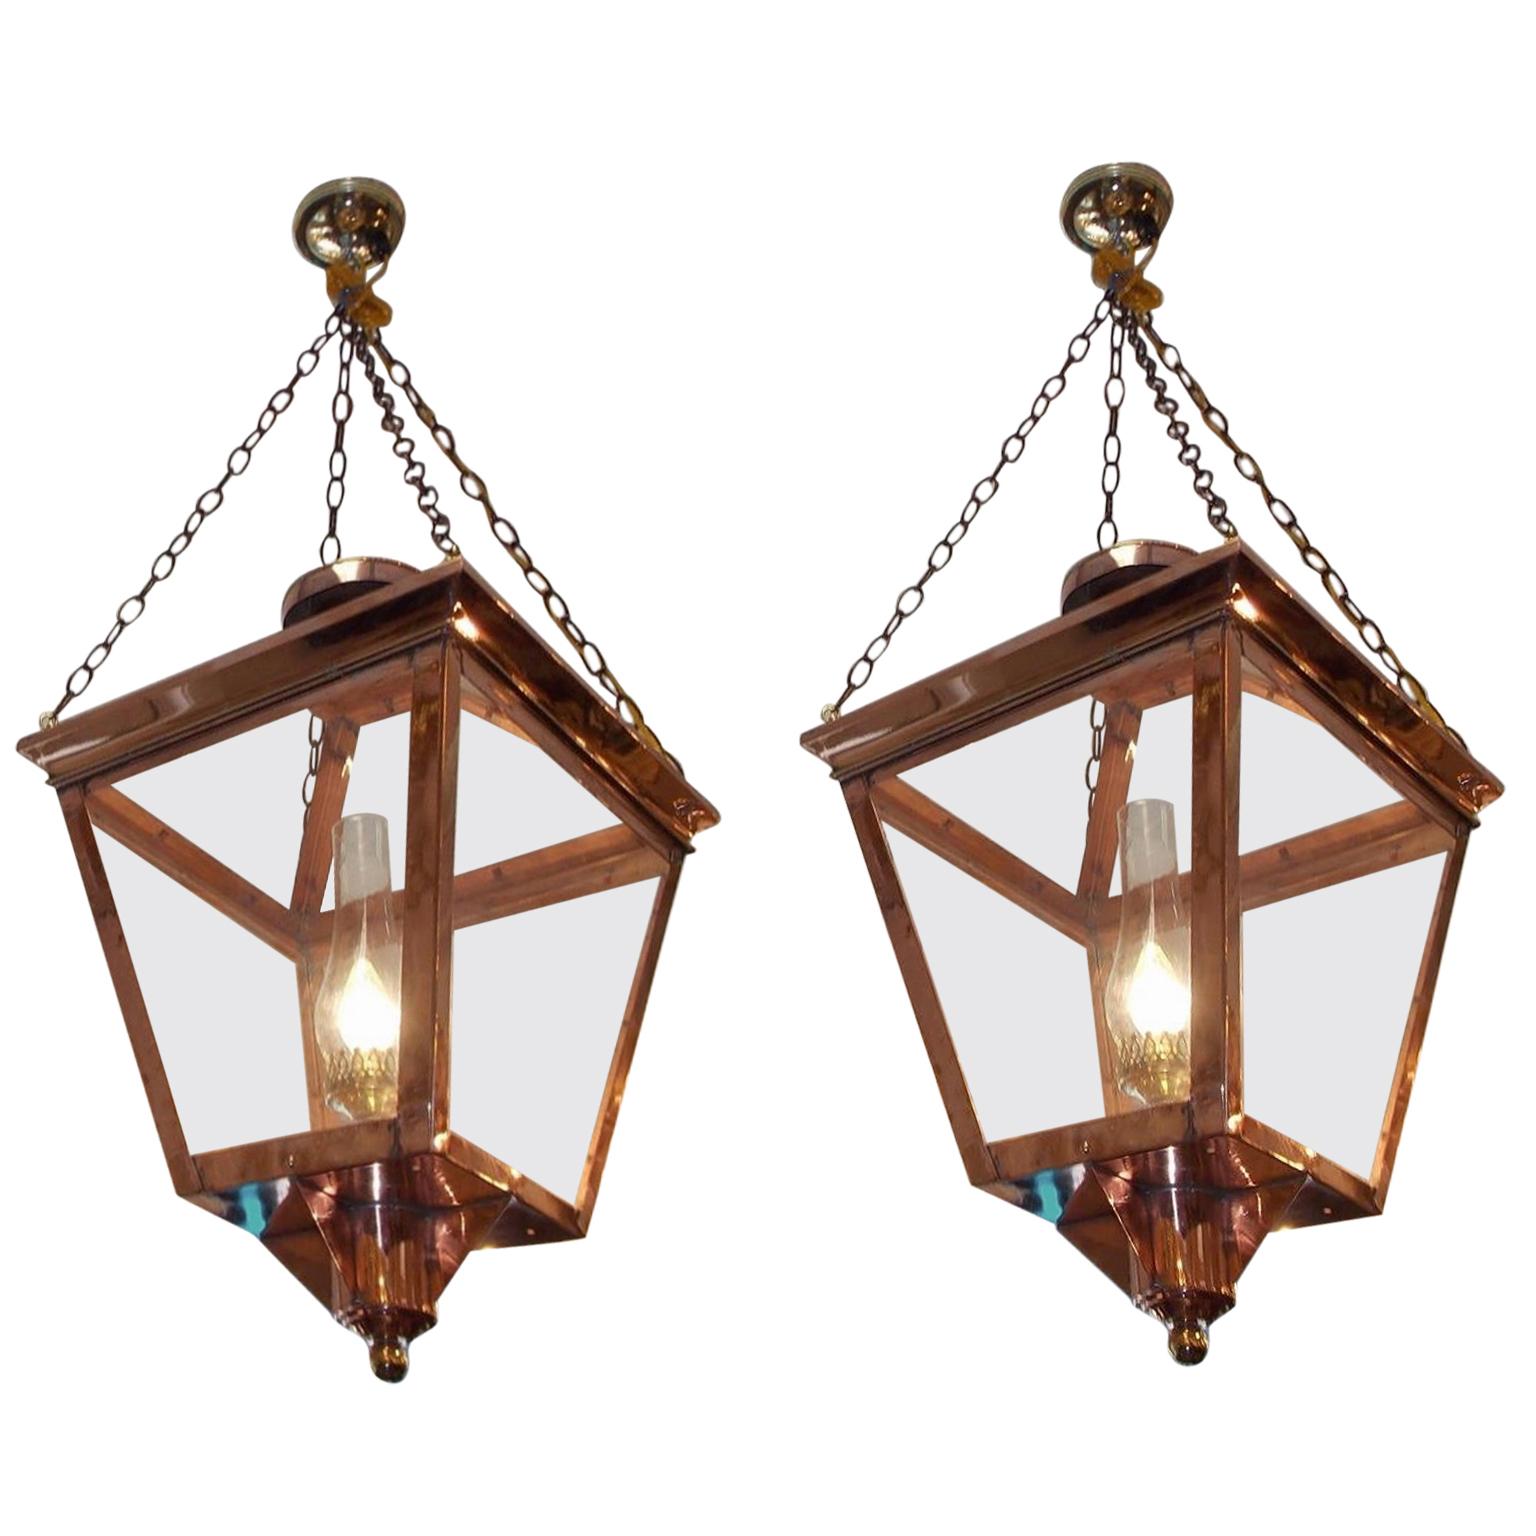 Pair of American Copper and Brass Hanging Glass Lanterns, Orig Gas, Circa 1810